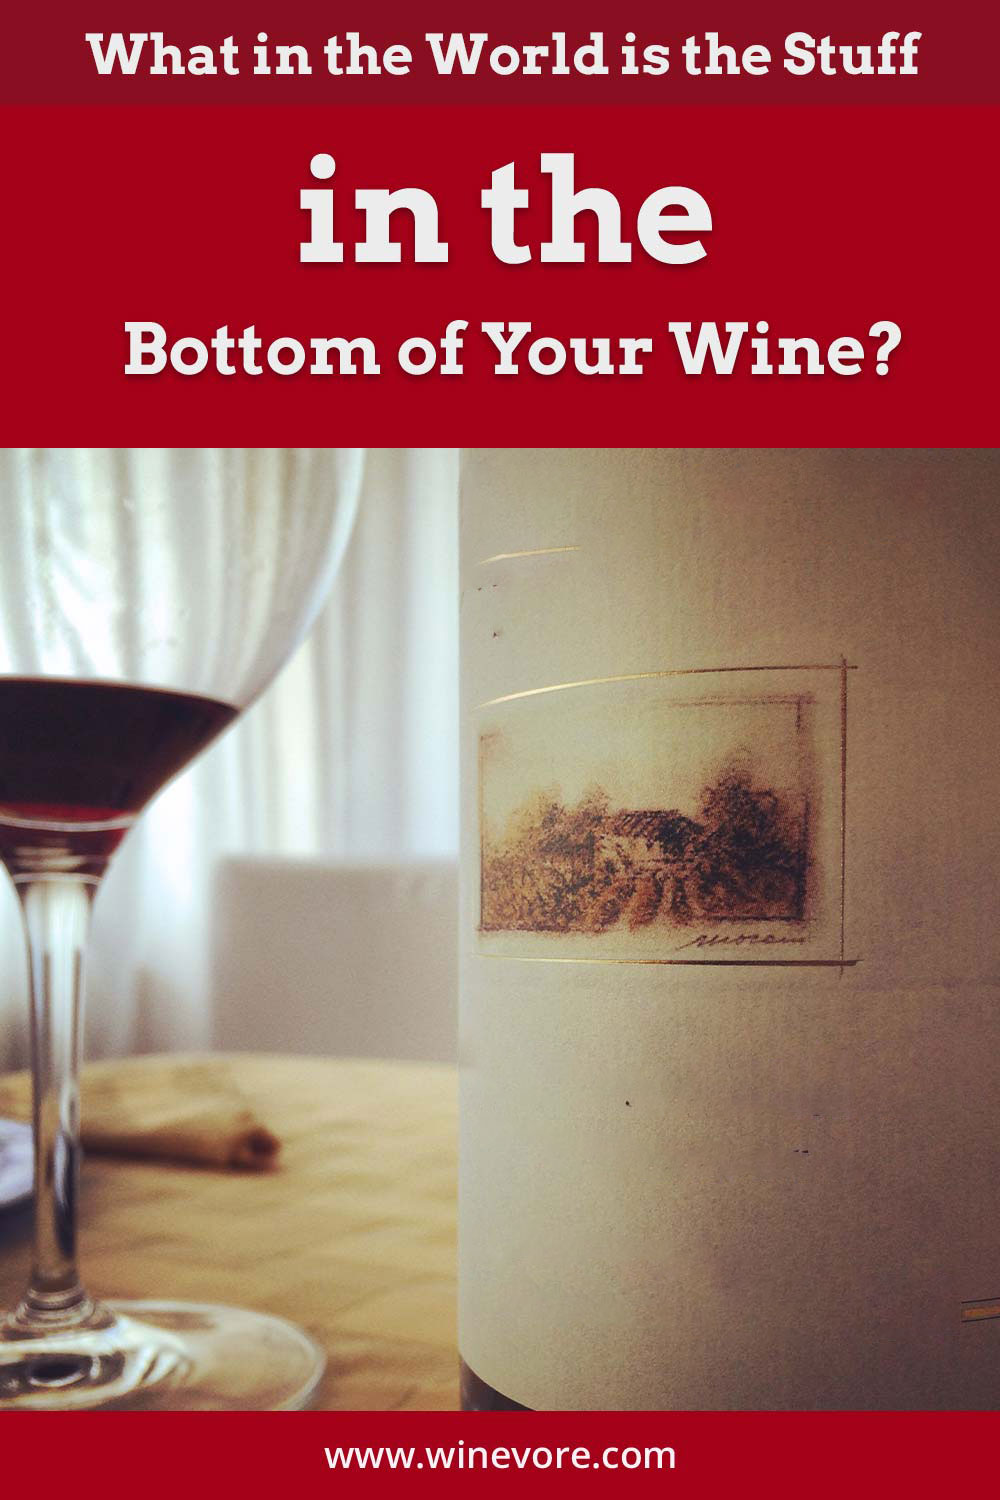 Wine glass and a bottle on a table - What is the Stuff in the Bottom of Your Wine?